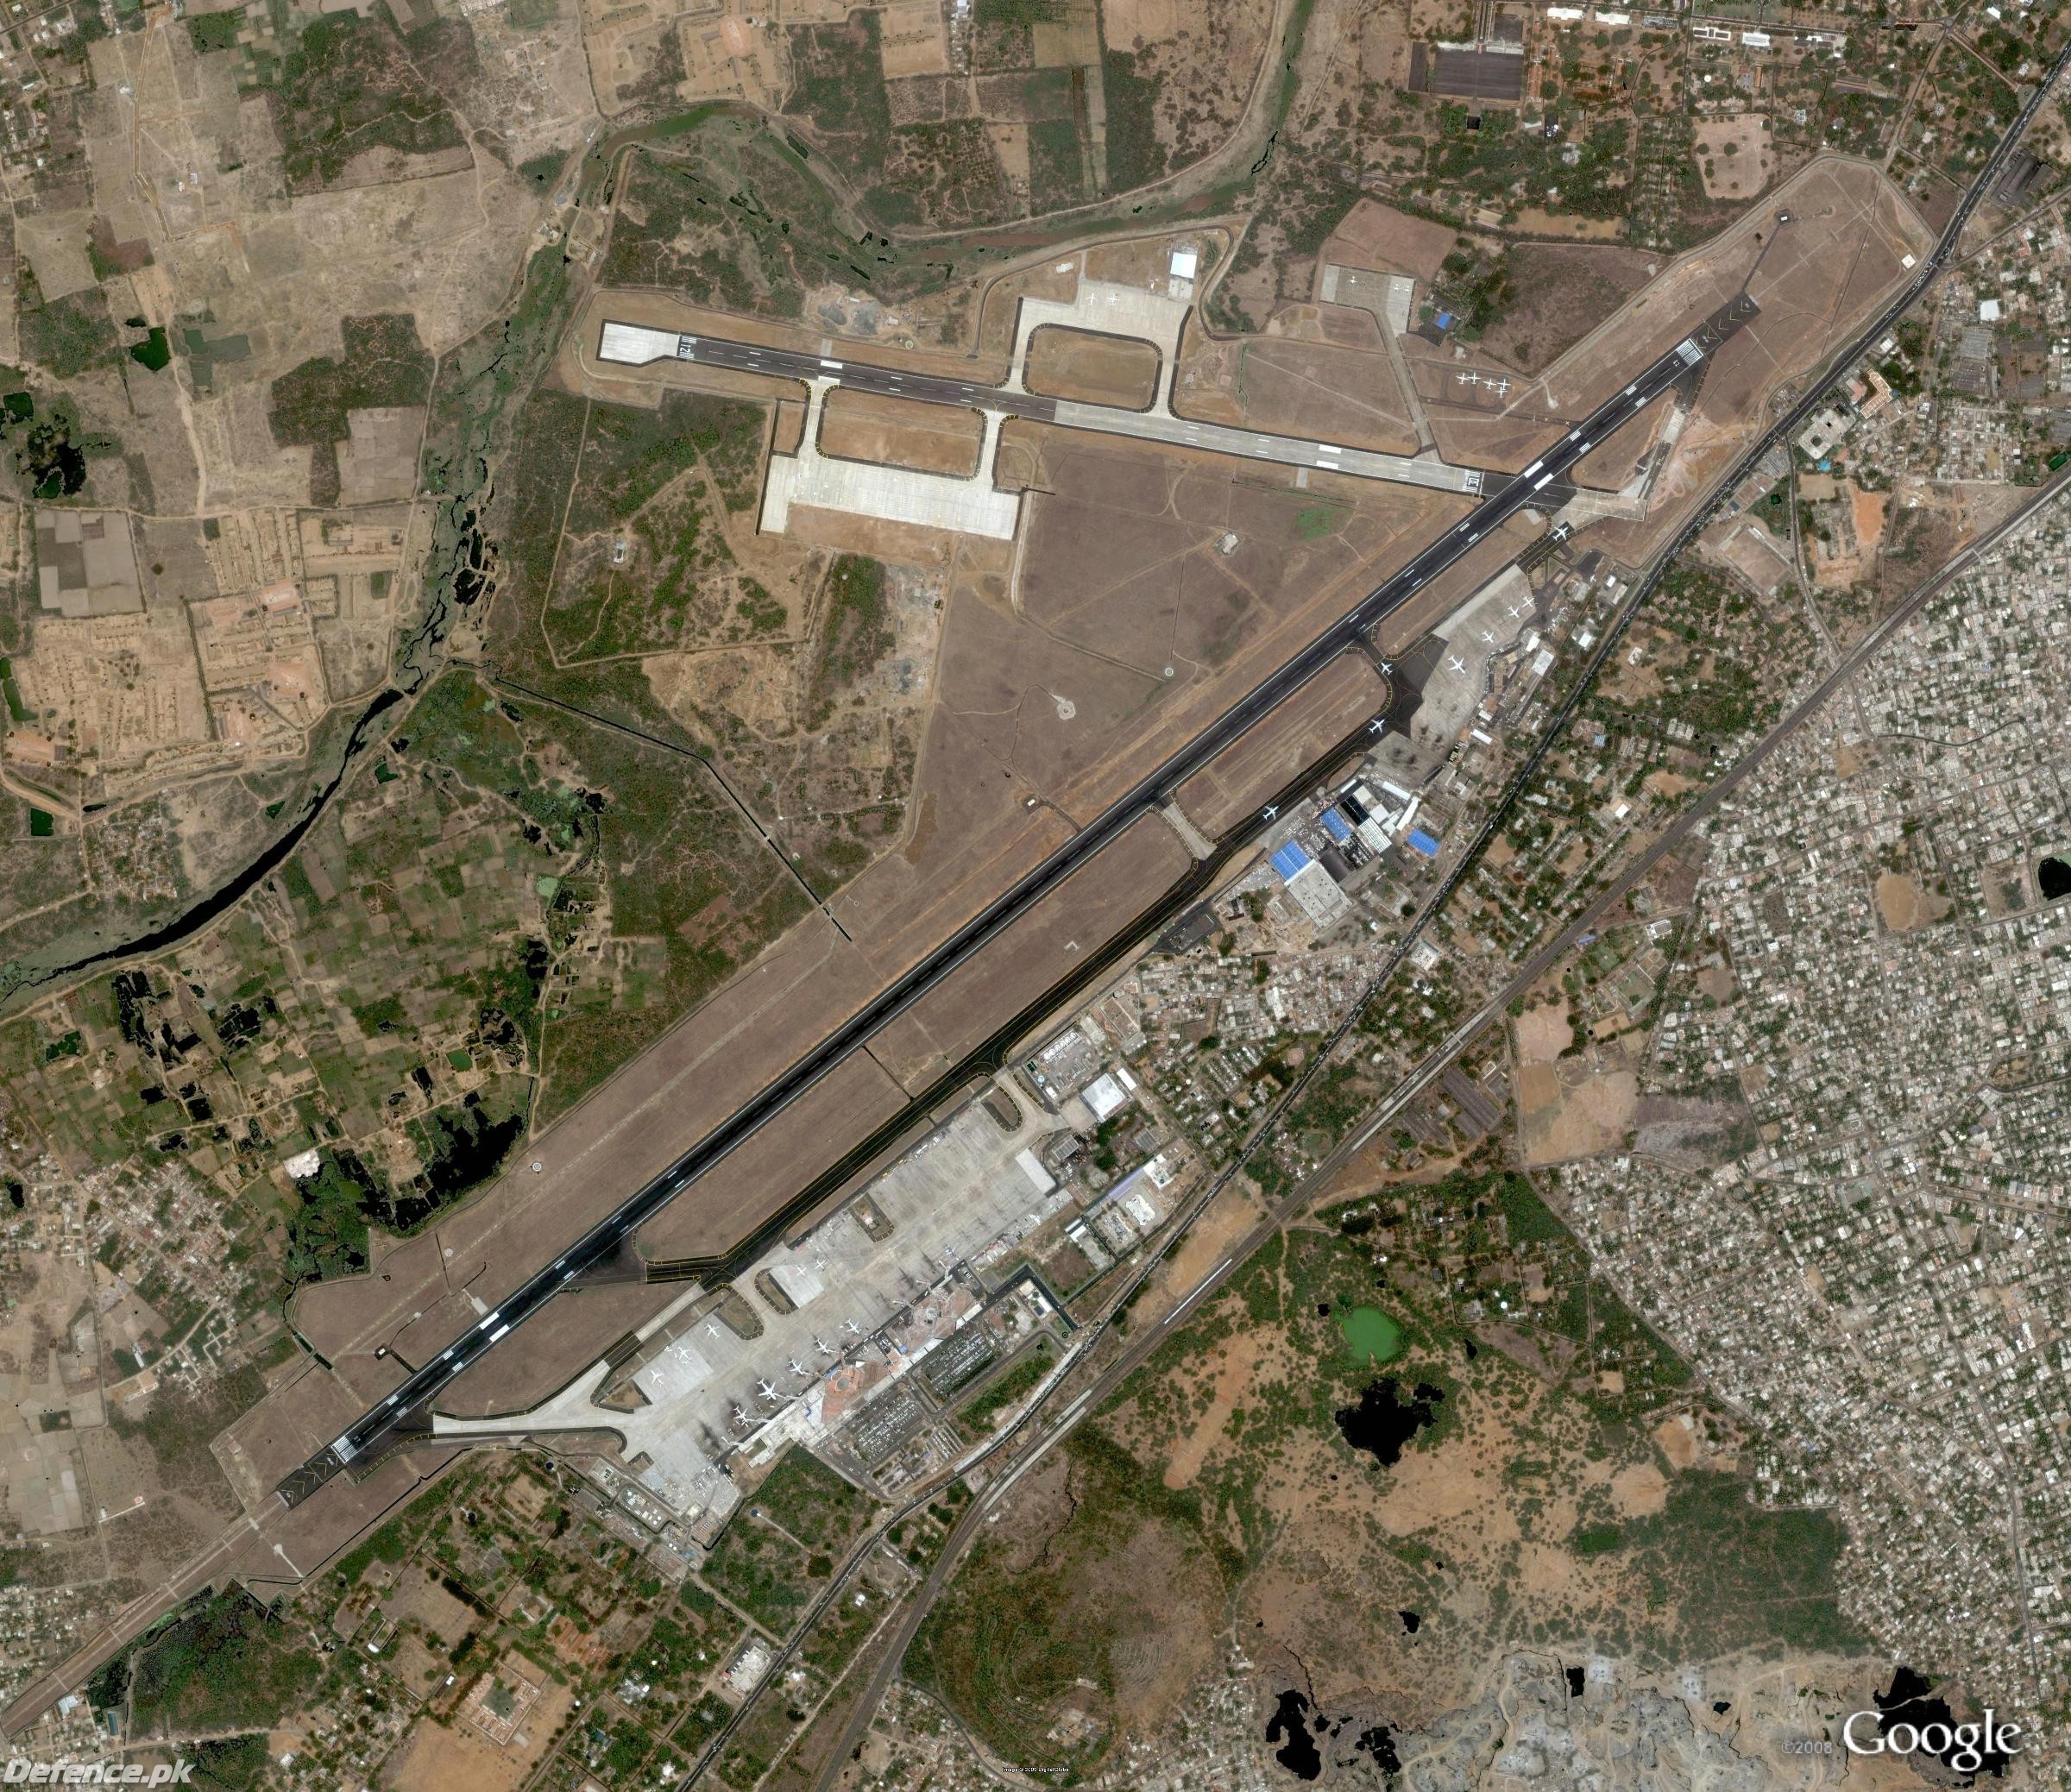 Channei Airbase Madras